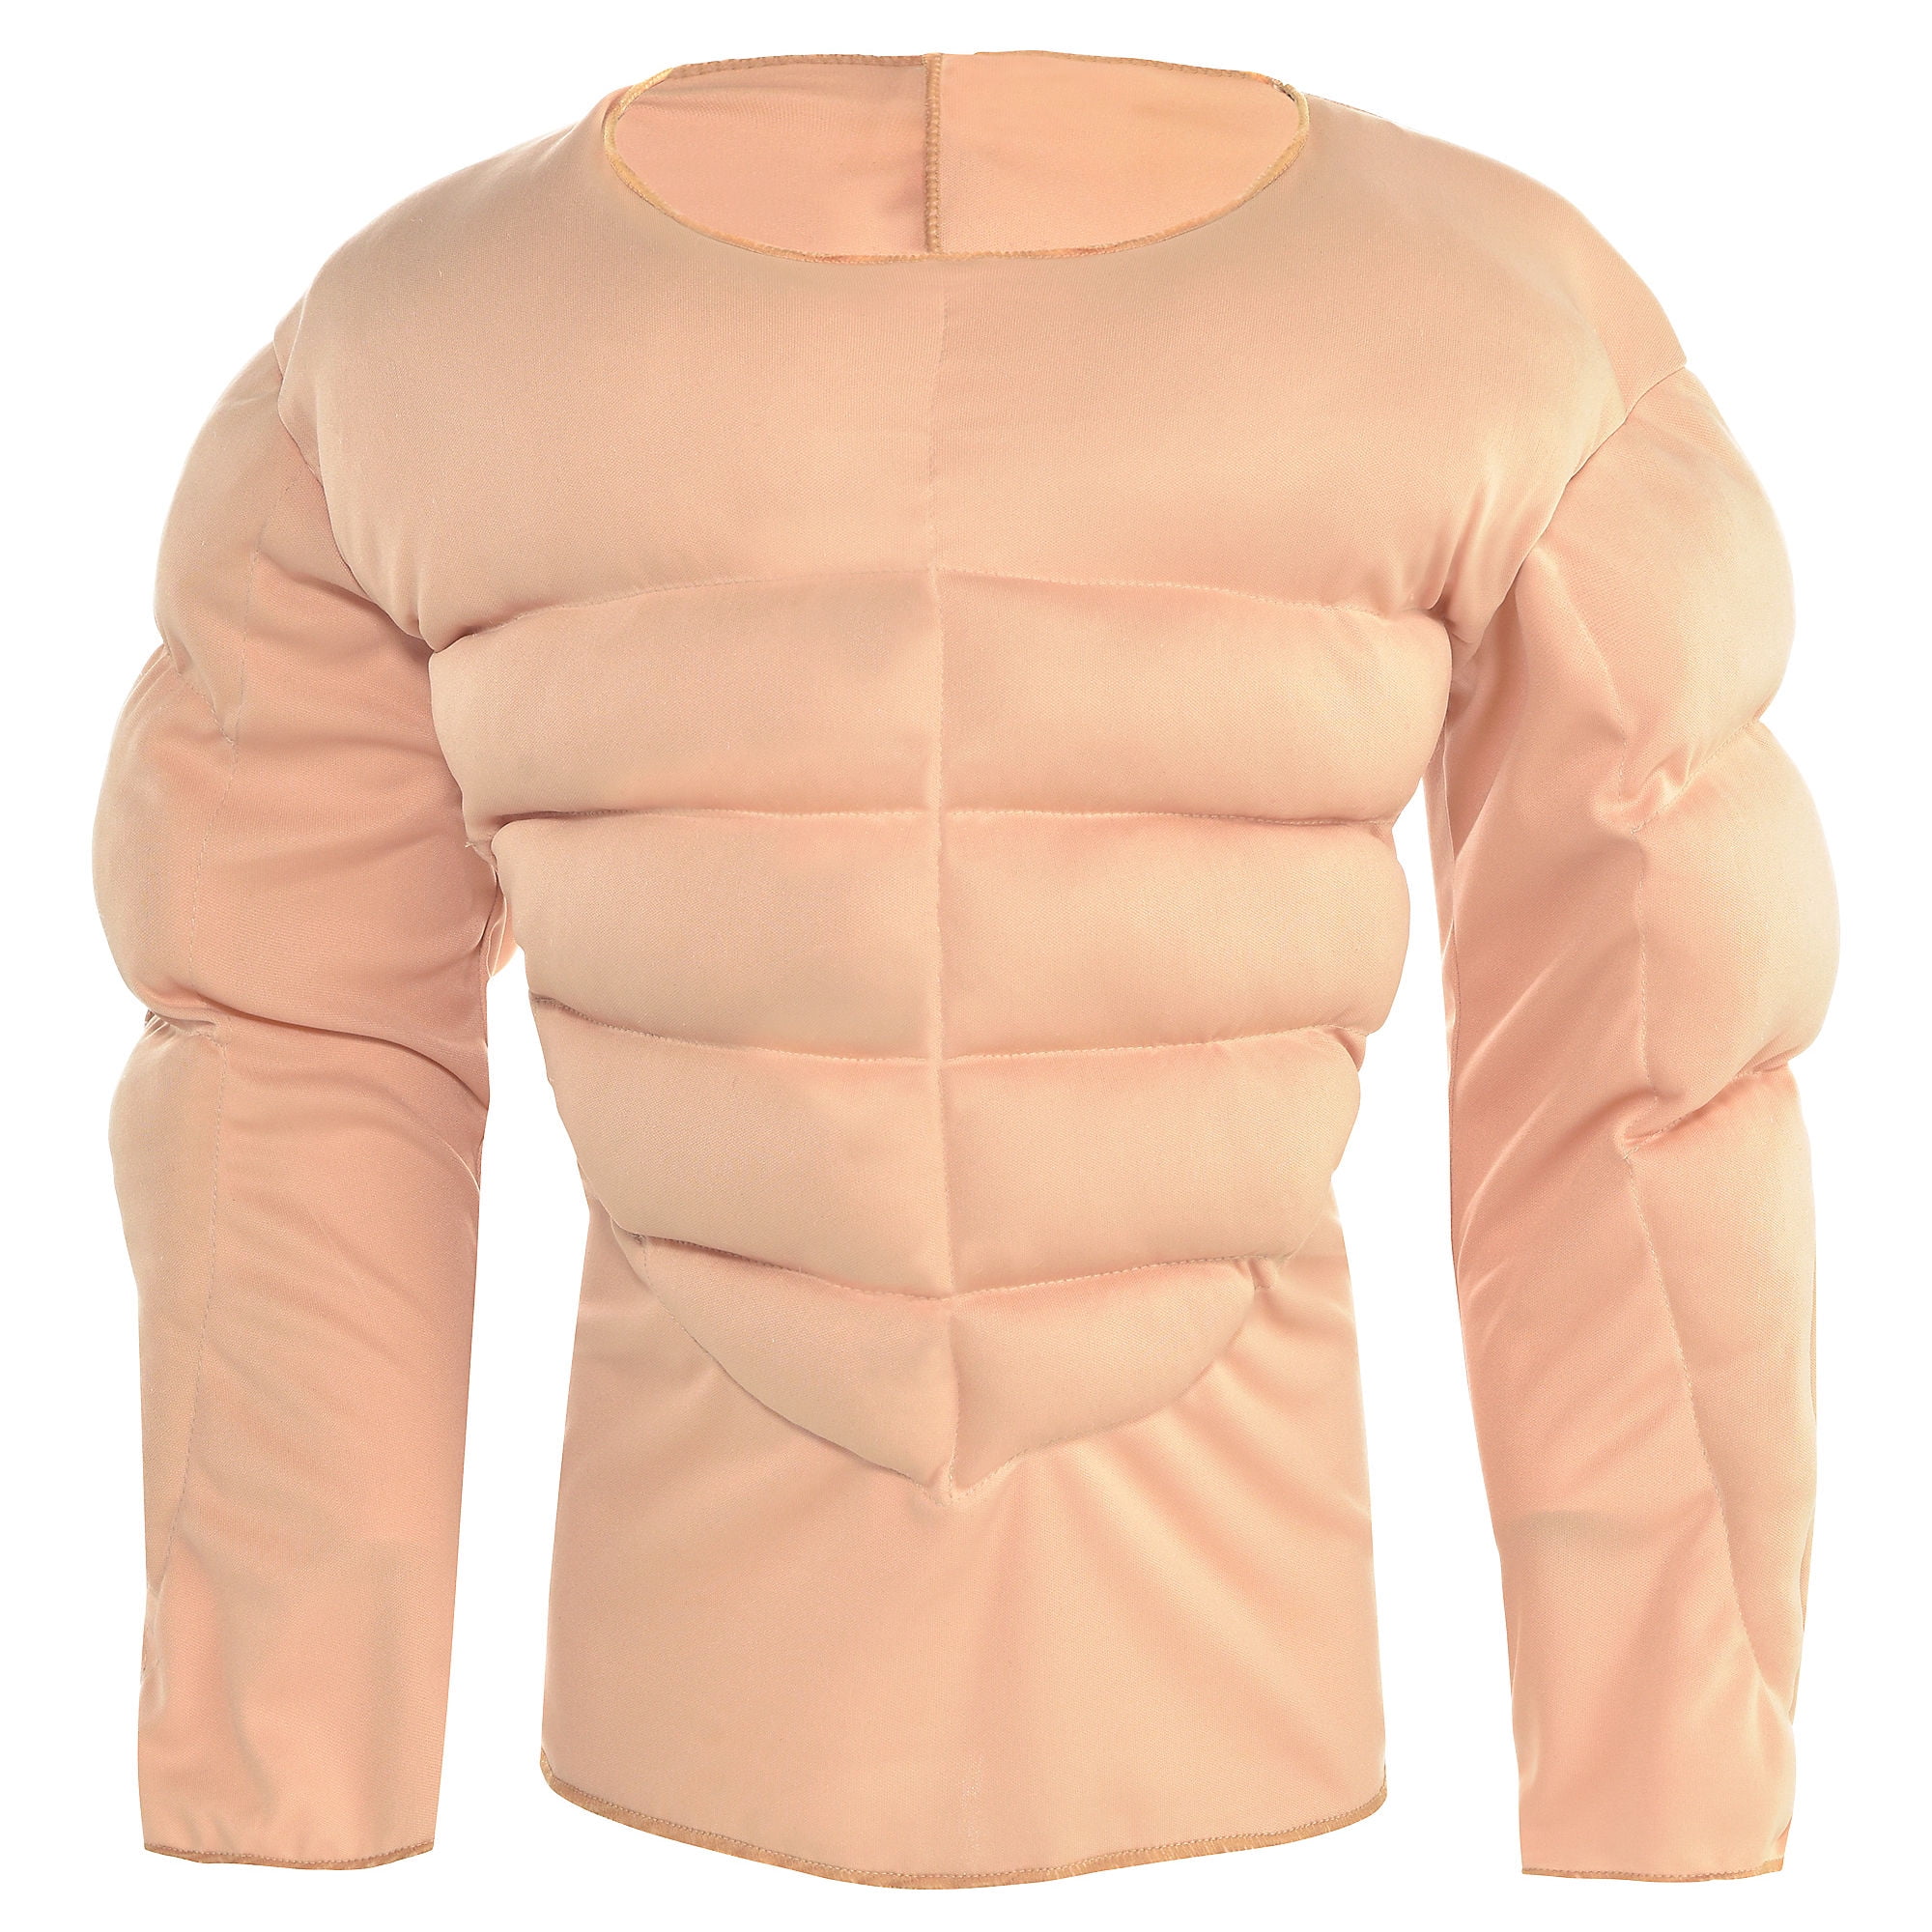 Muscle Padding Shirt Halloween Costume Accessory for Kids, Large/ Extra  Large - Walmart.com